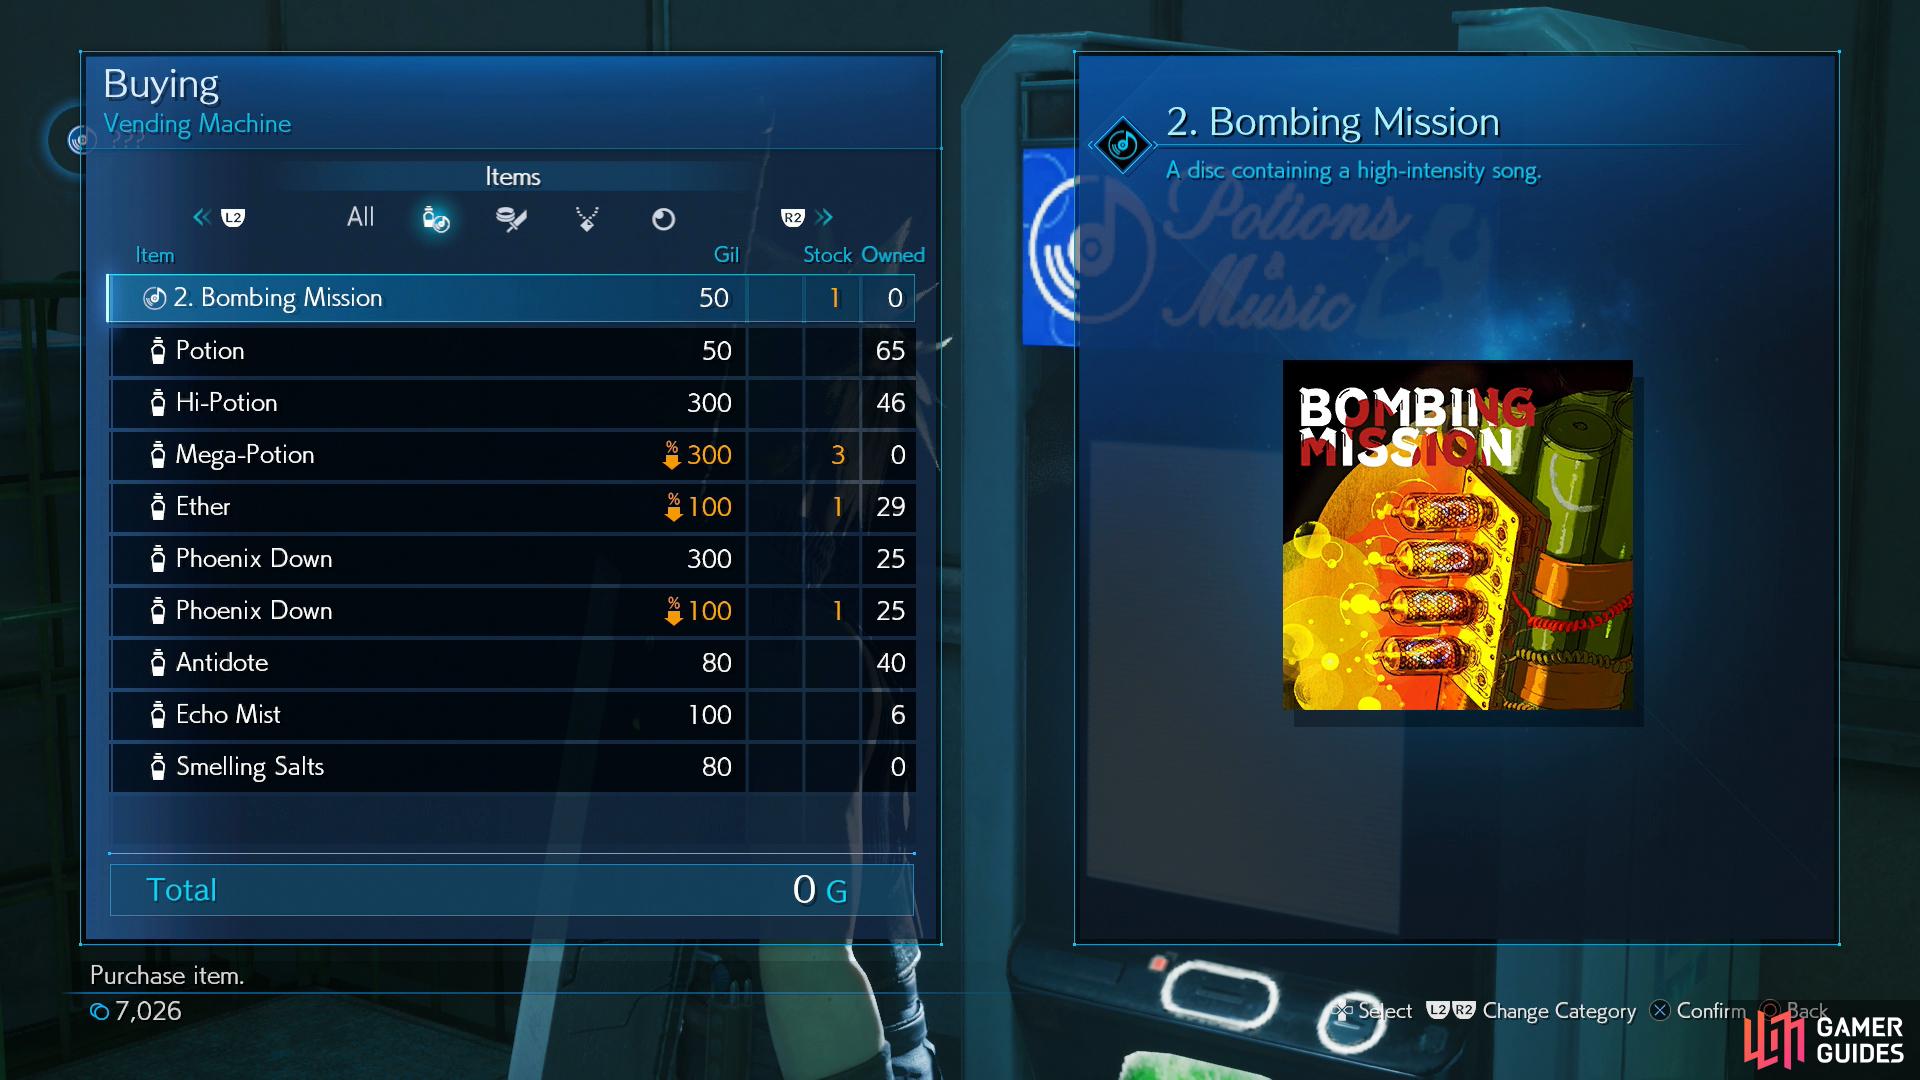 Be sure to buy the Bombing Mission Music Disc from the vending machine.